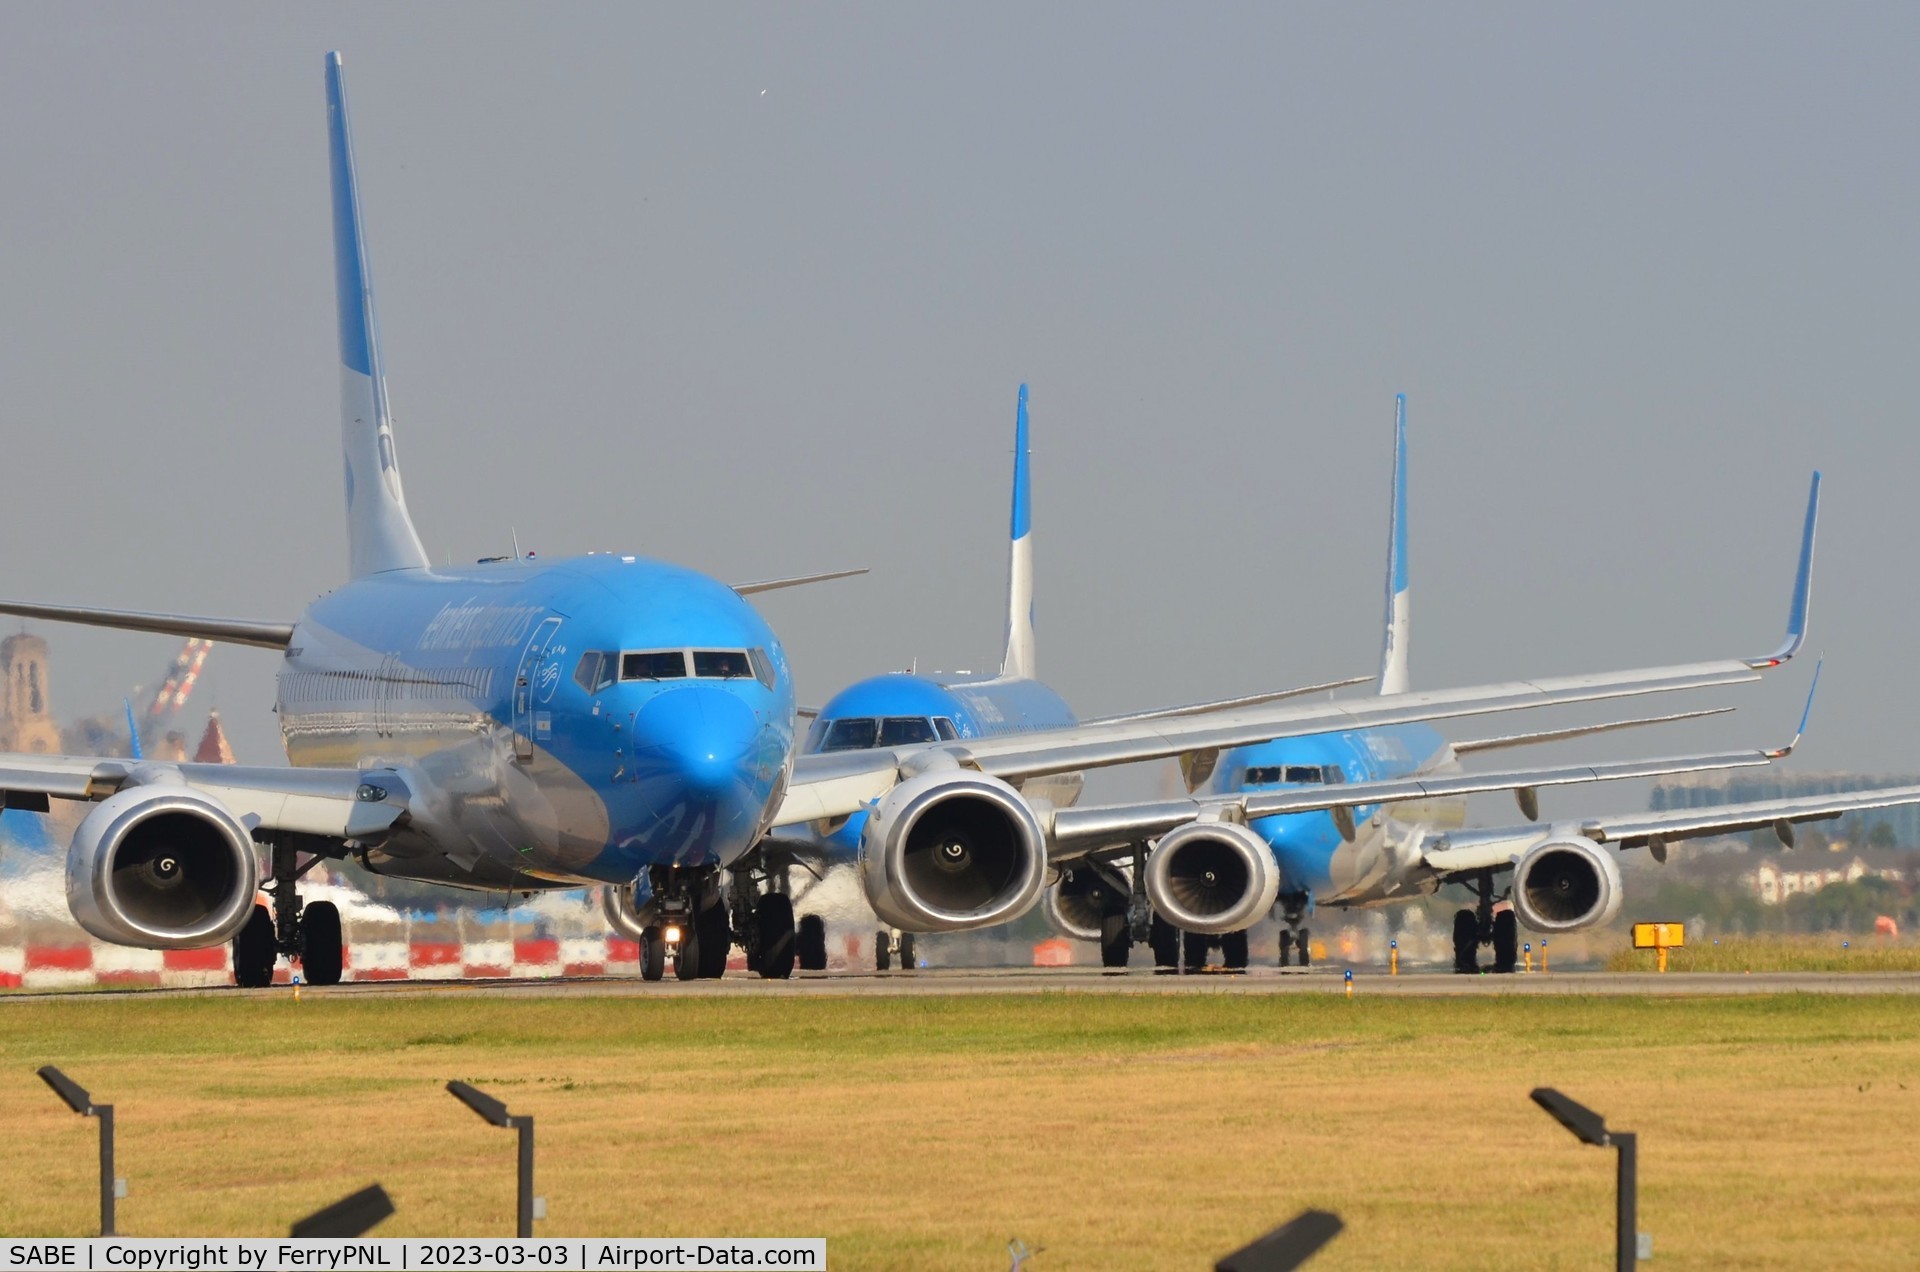 Jorge Newbery Airport, Buenos Aires Argentina (SABE) - Queuing for Aerolineas Argentinas at AEP in order to depart